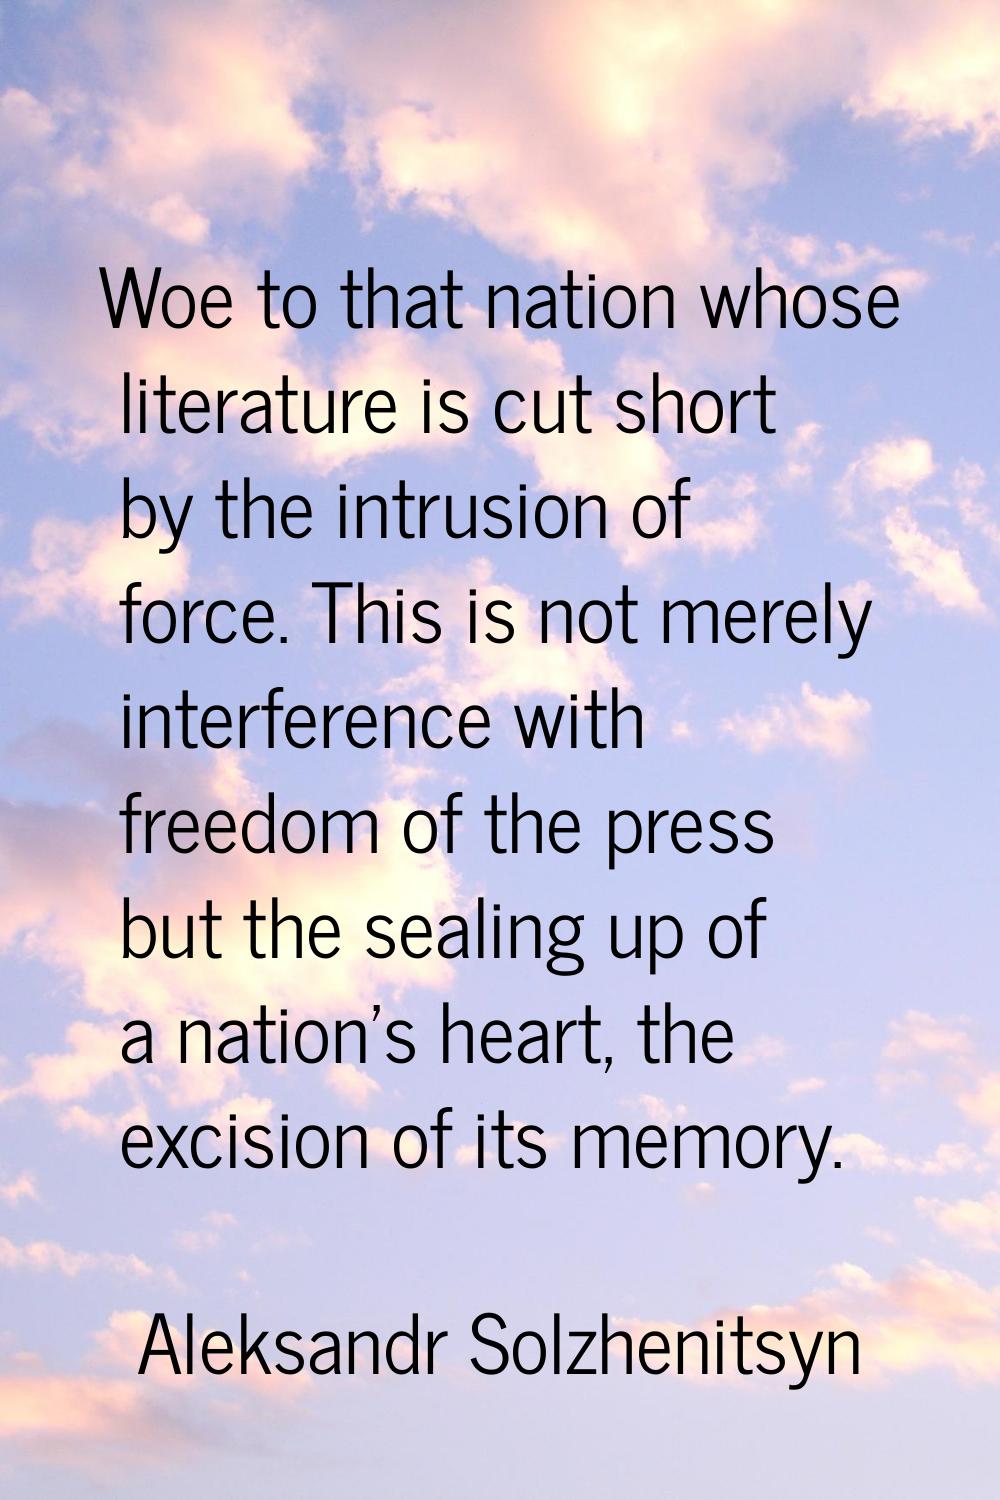 Woe to that nation whose literature is cut short by the intrusion of force. This is not merely inte